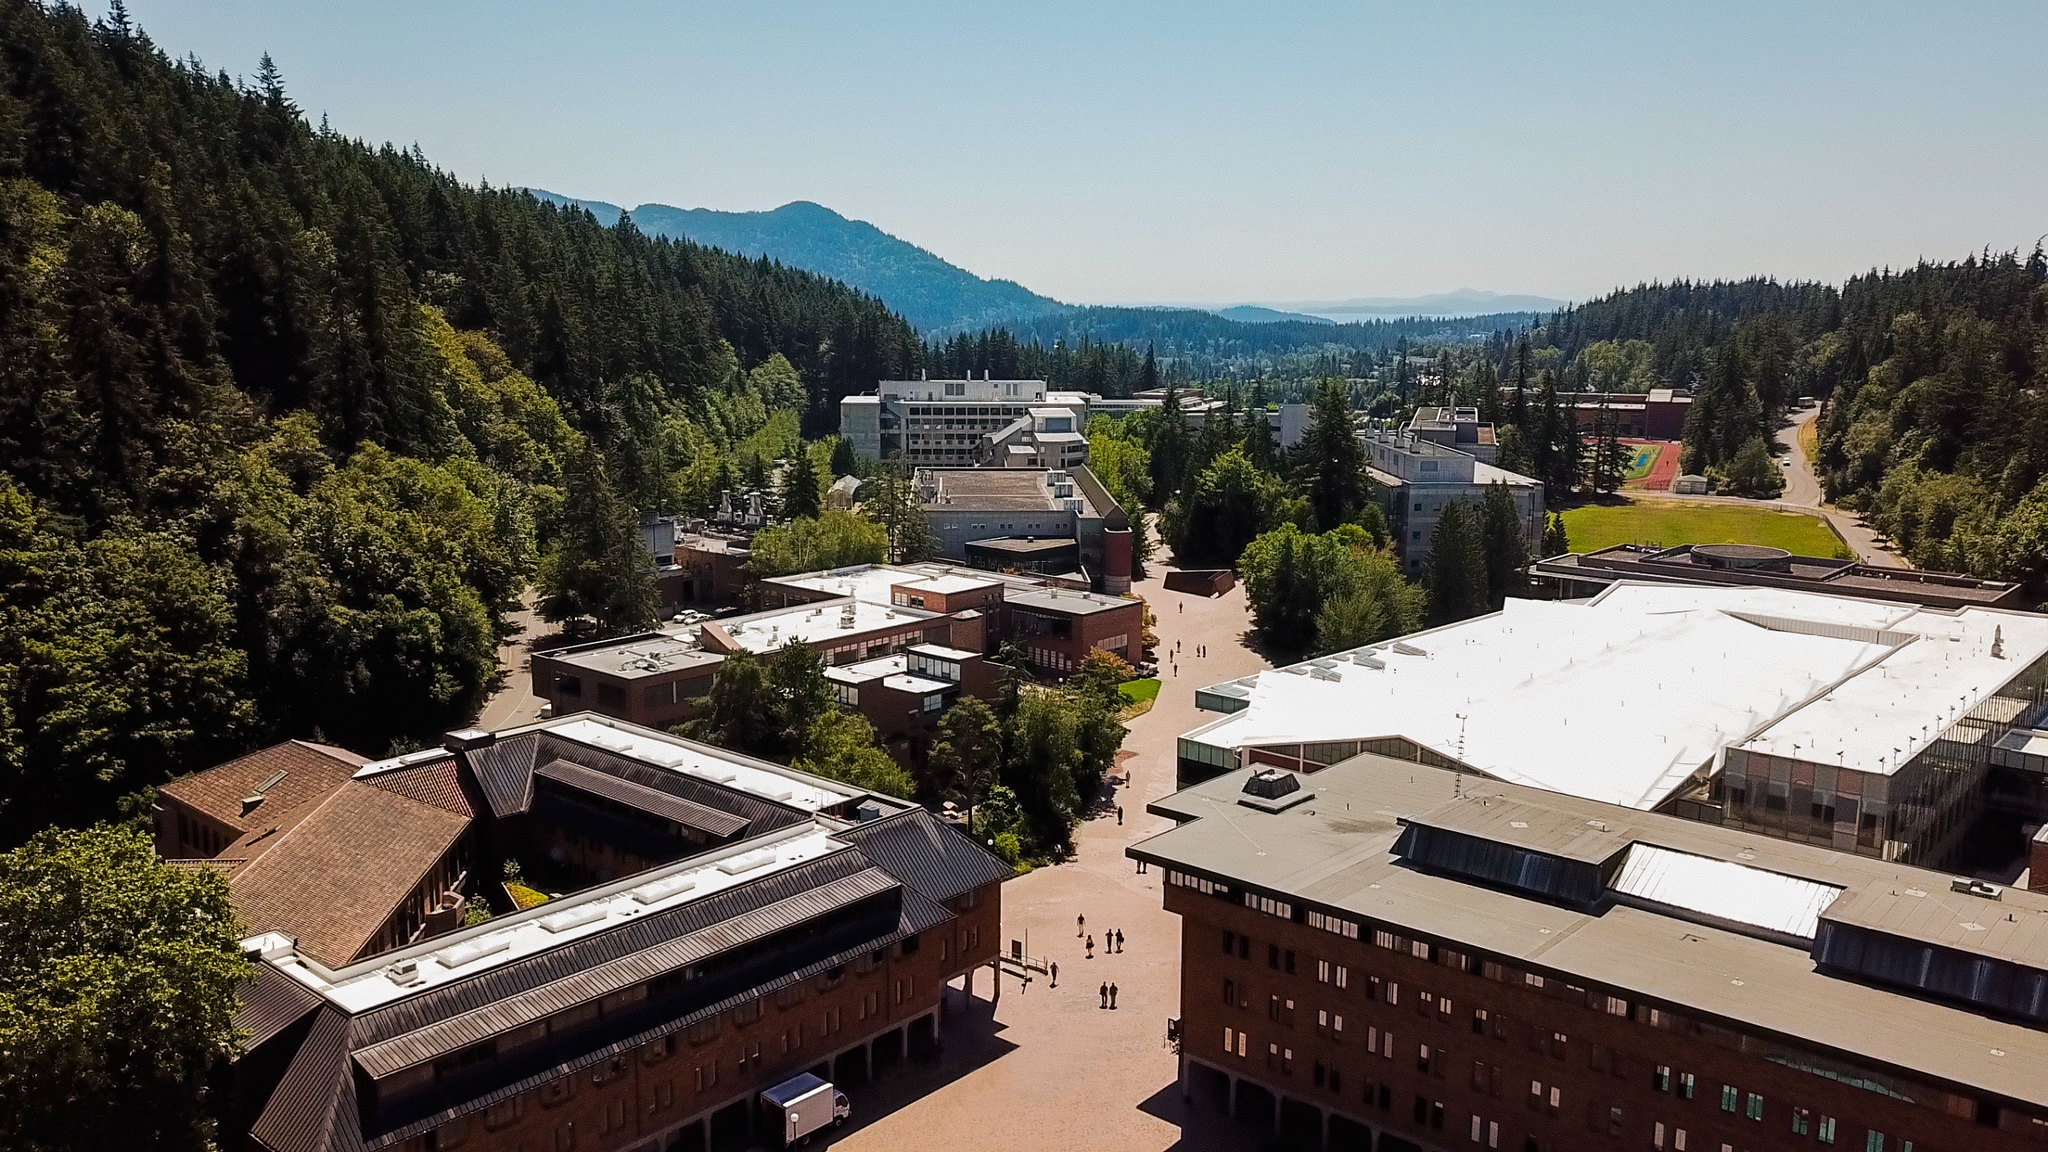 Overhead view of the campus of Western Washington University